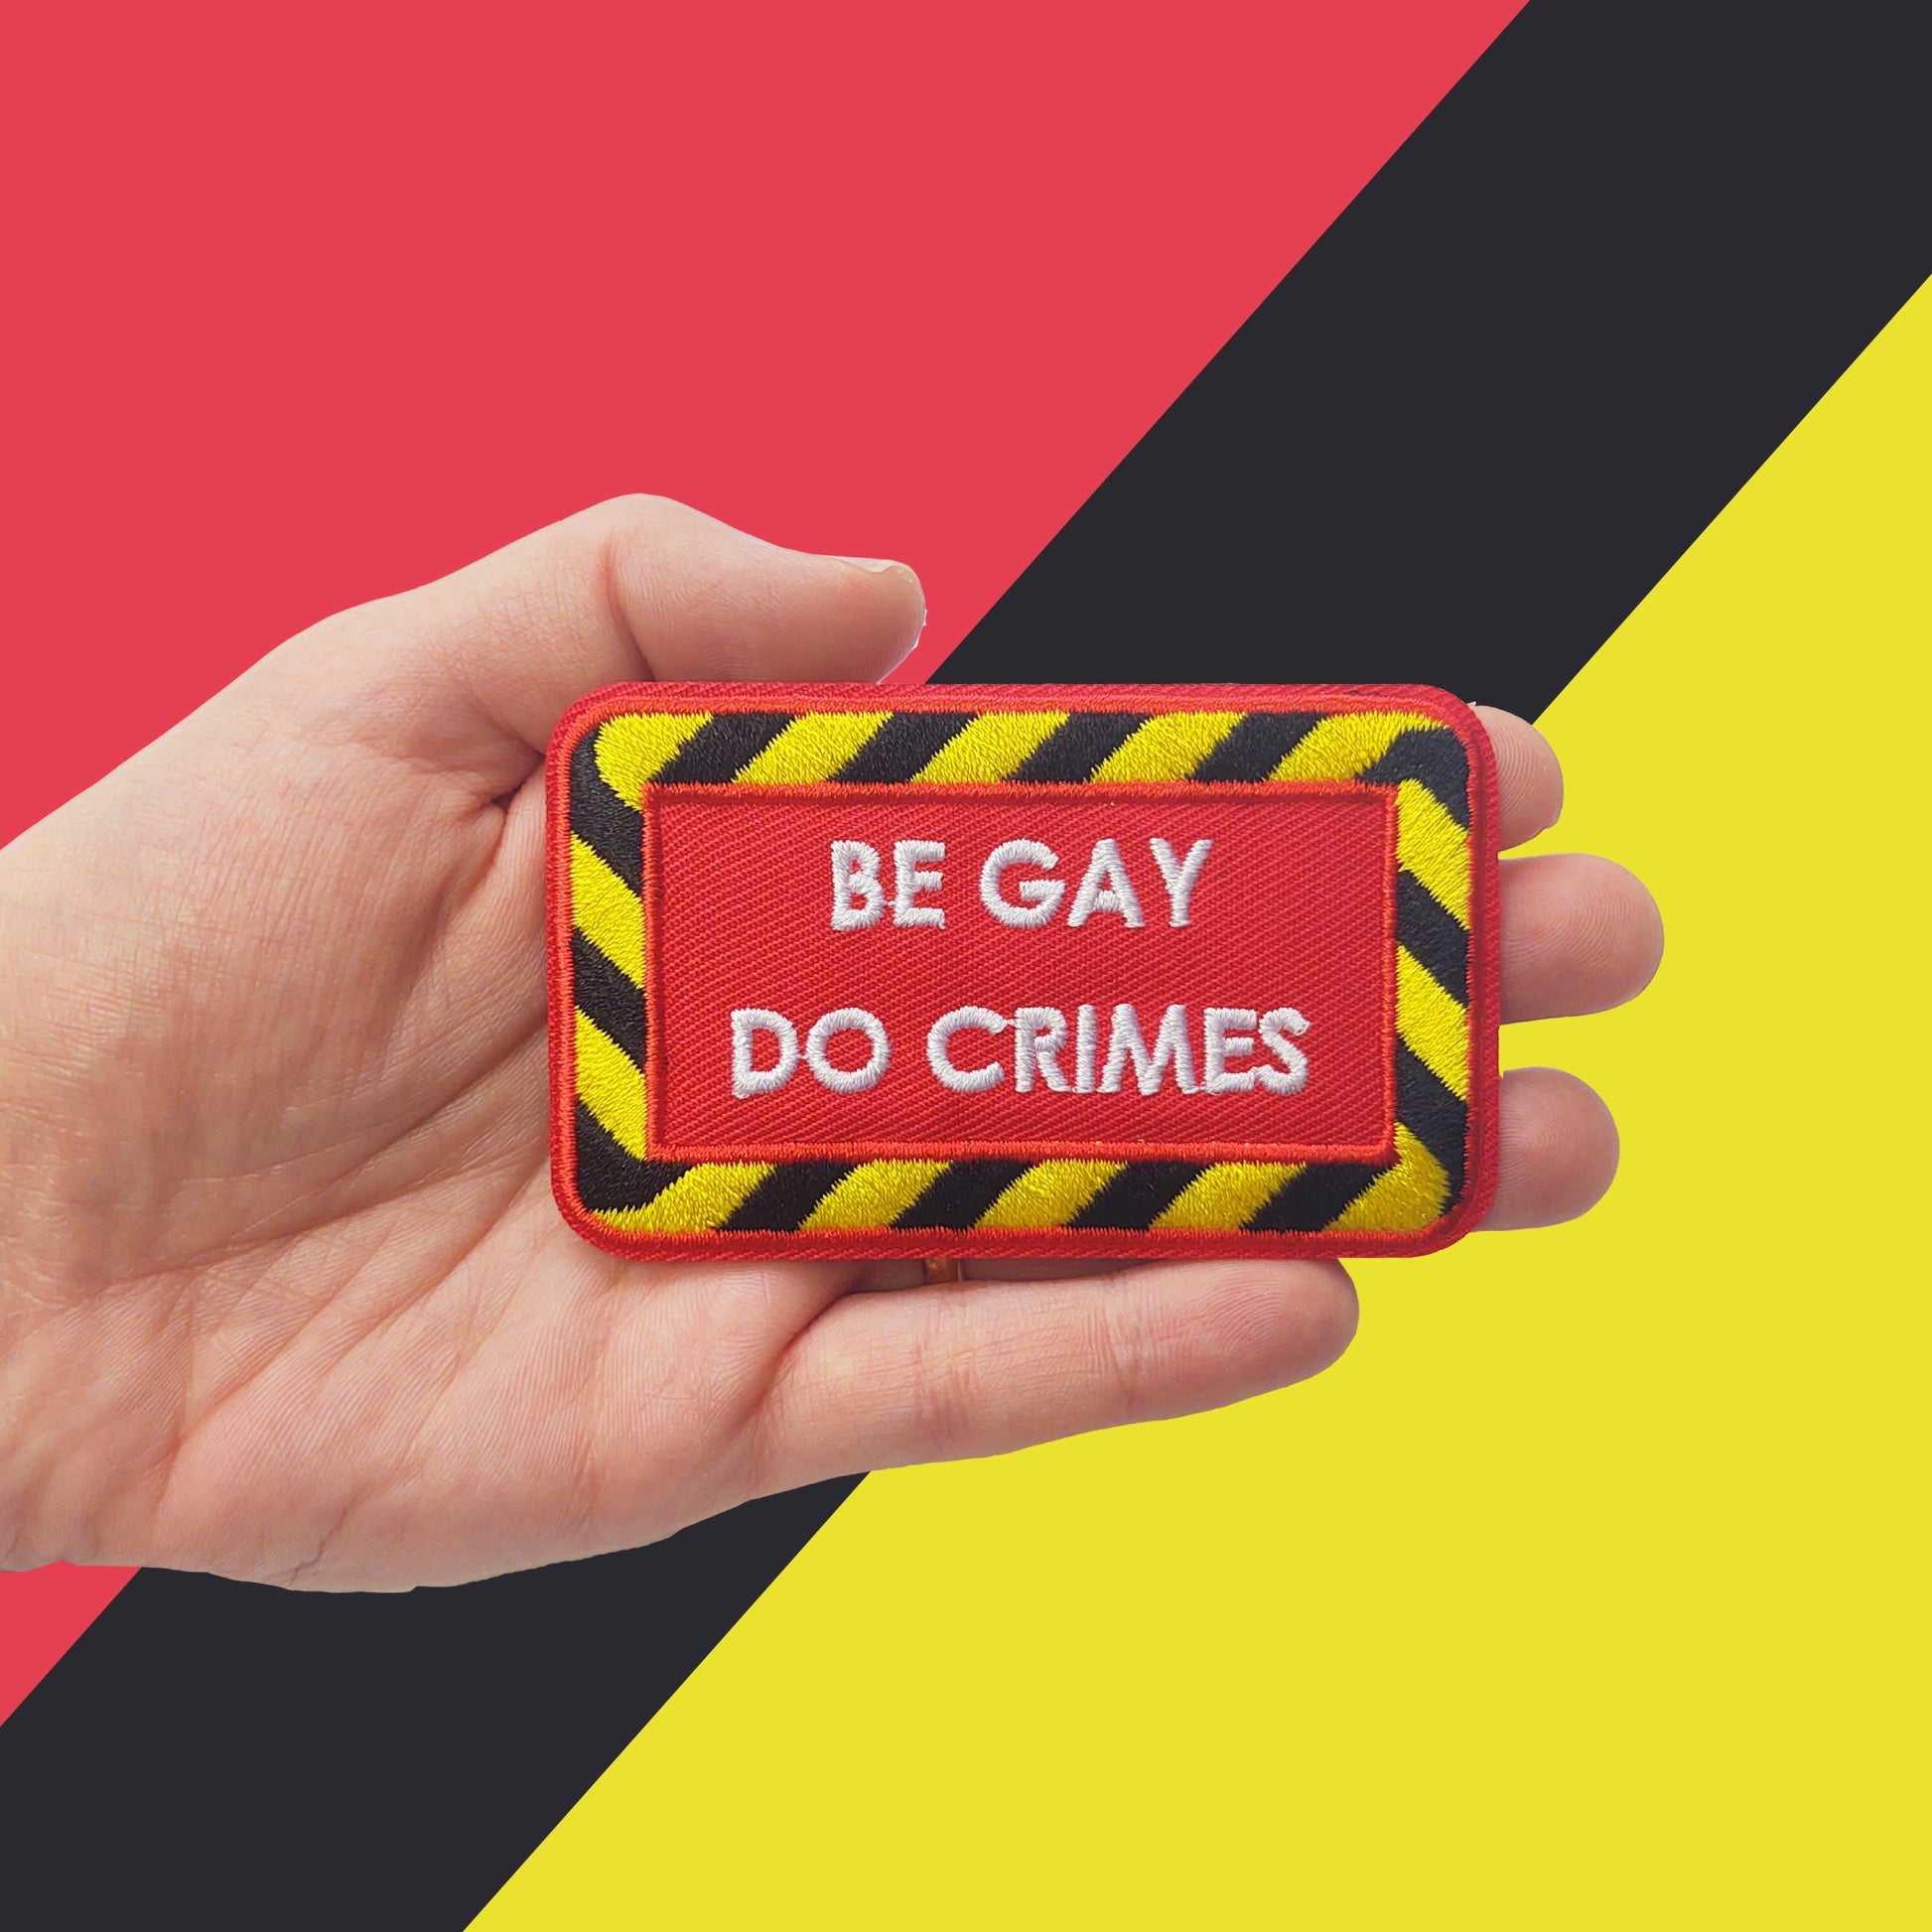 red iron-on patch with a black and yellow striped border and white text "be gay do crimes" held by a light-skinned hand. The background is black, red, and yellow shapes.